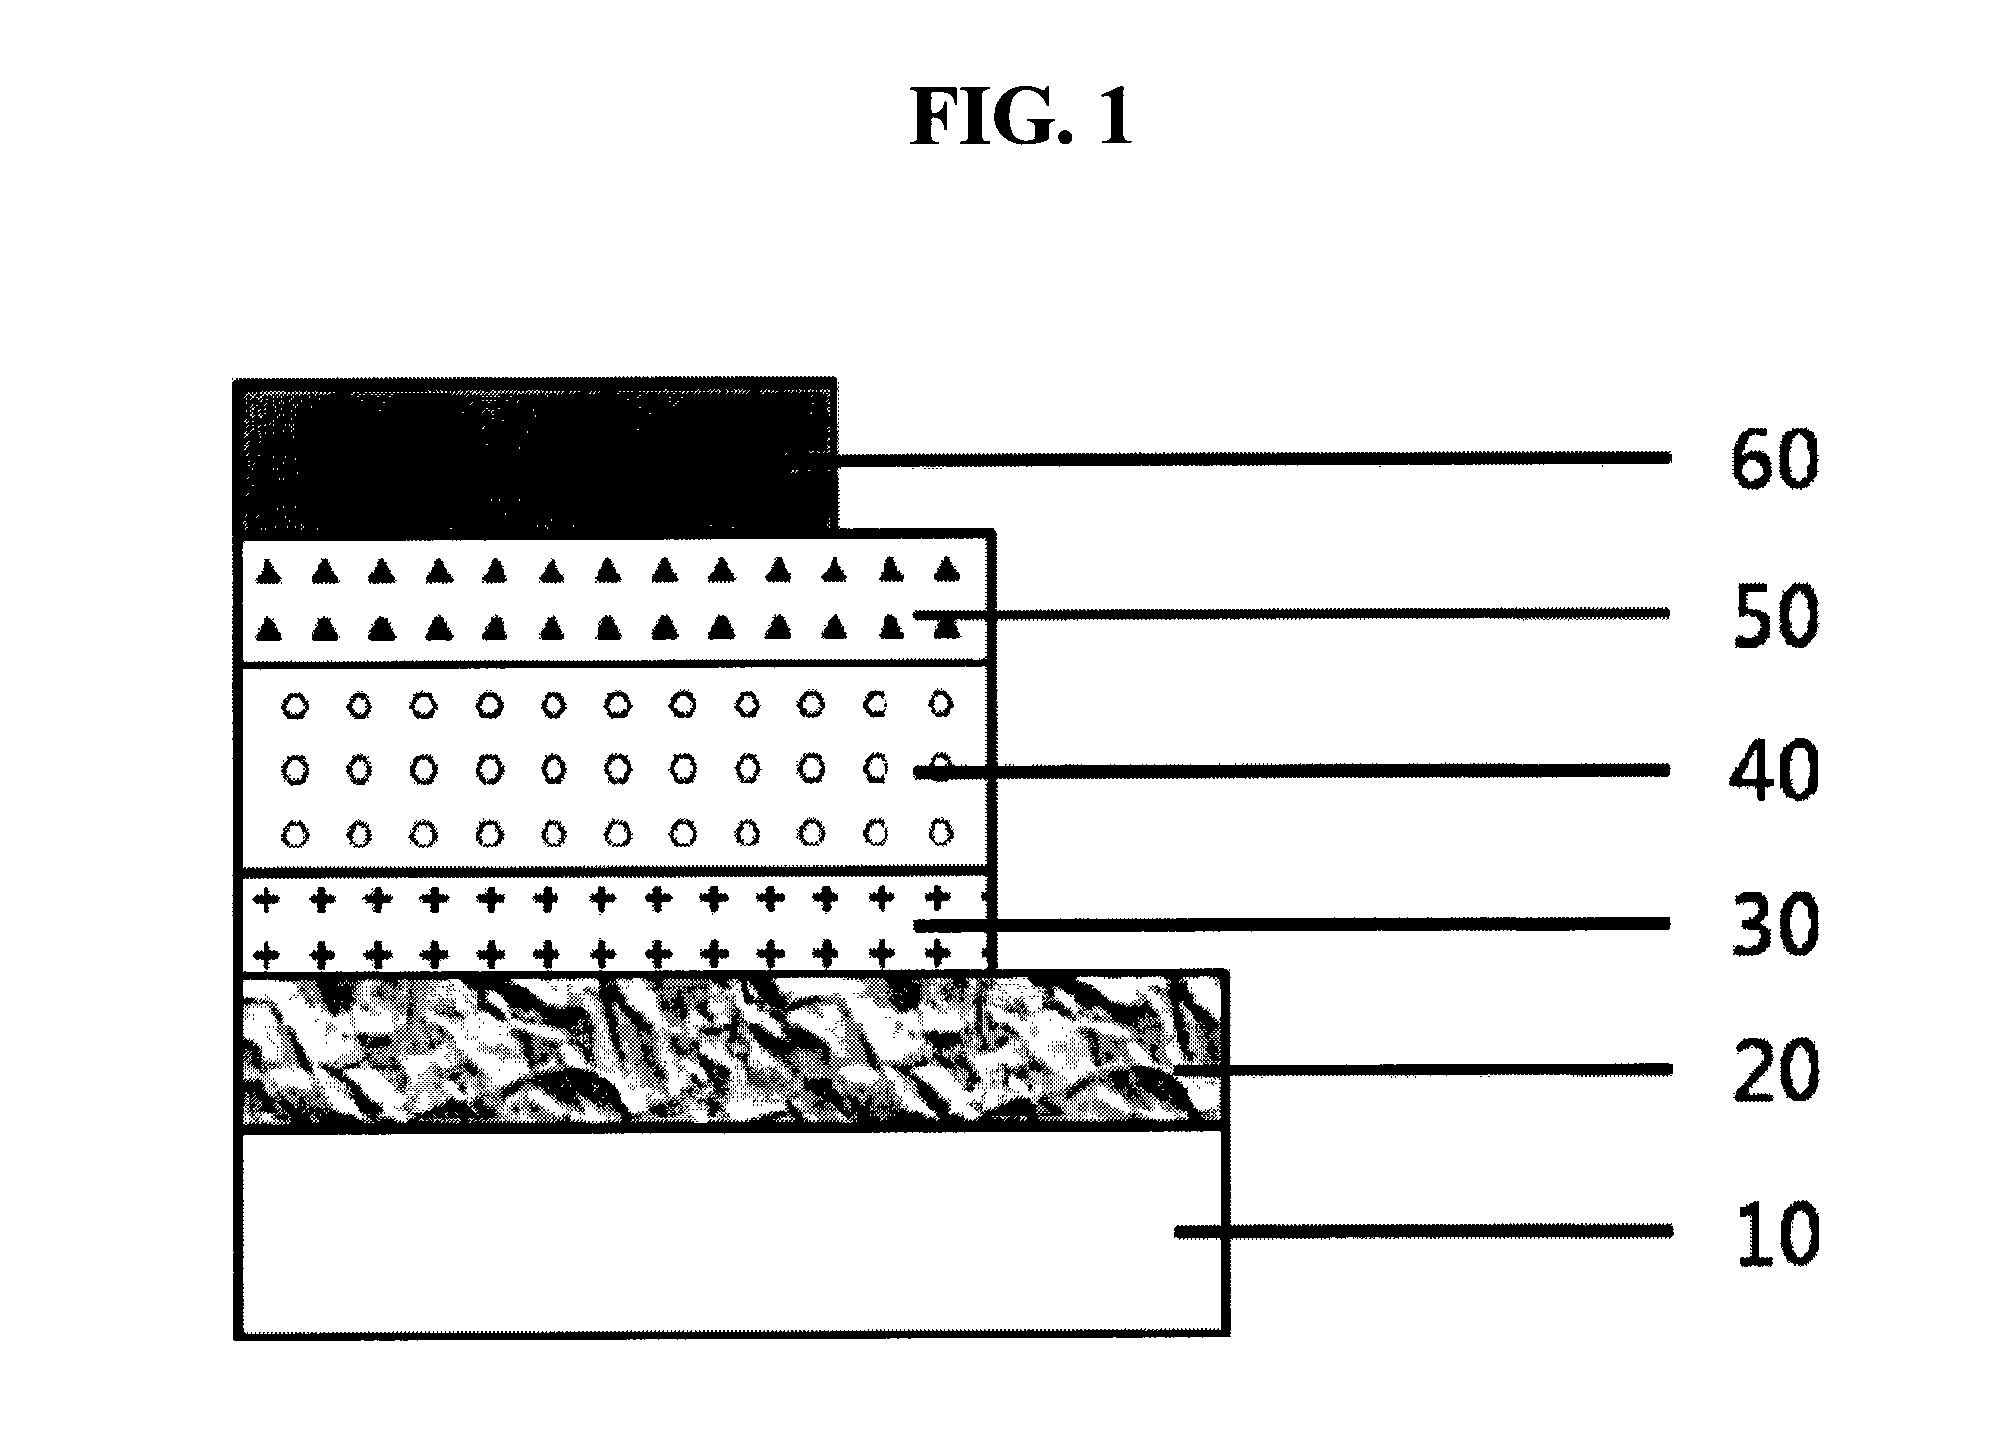 Tandem solar cell using amorphous silicon solar cell and organic solar cell